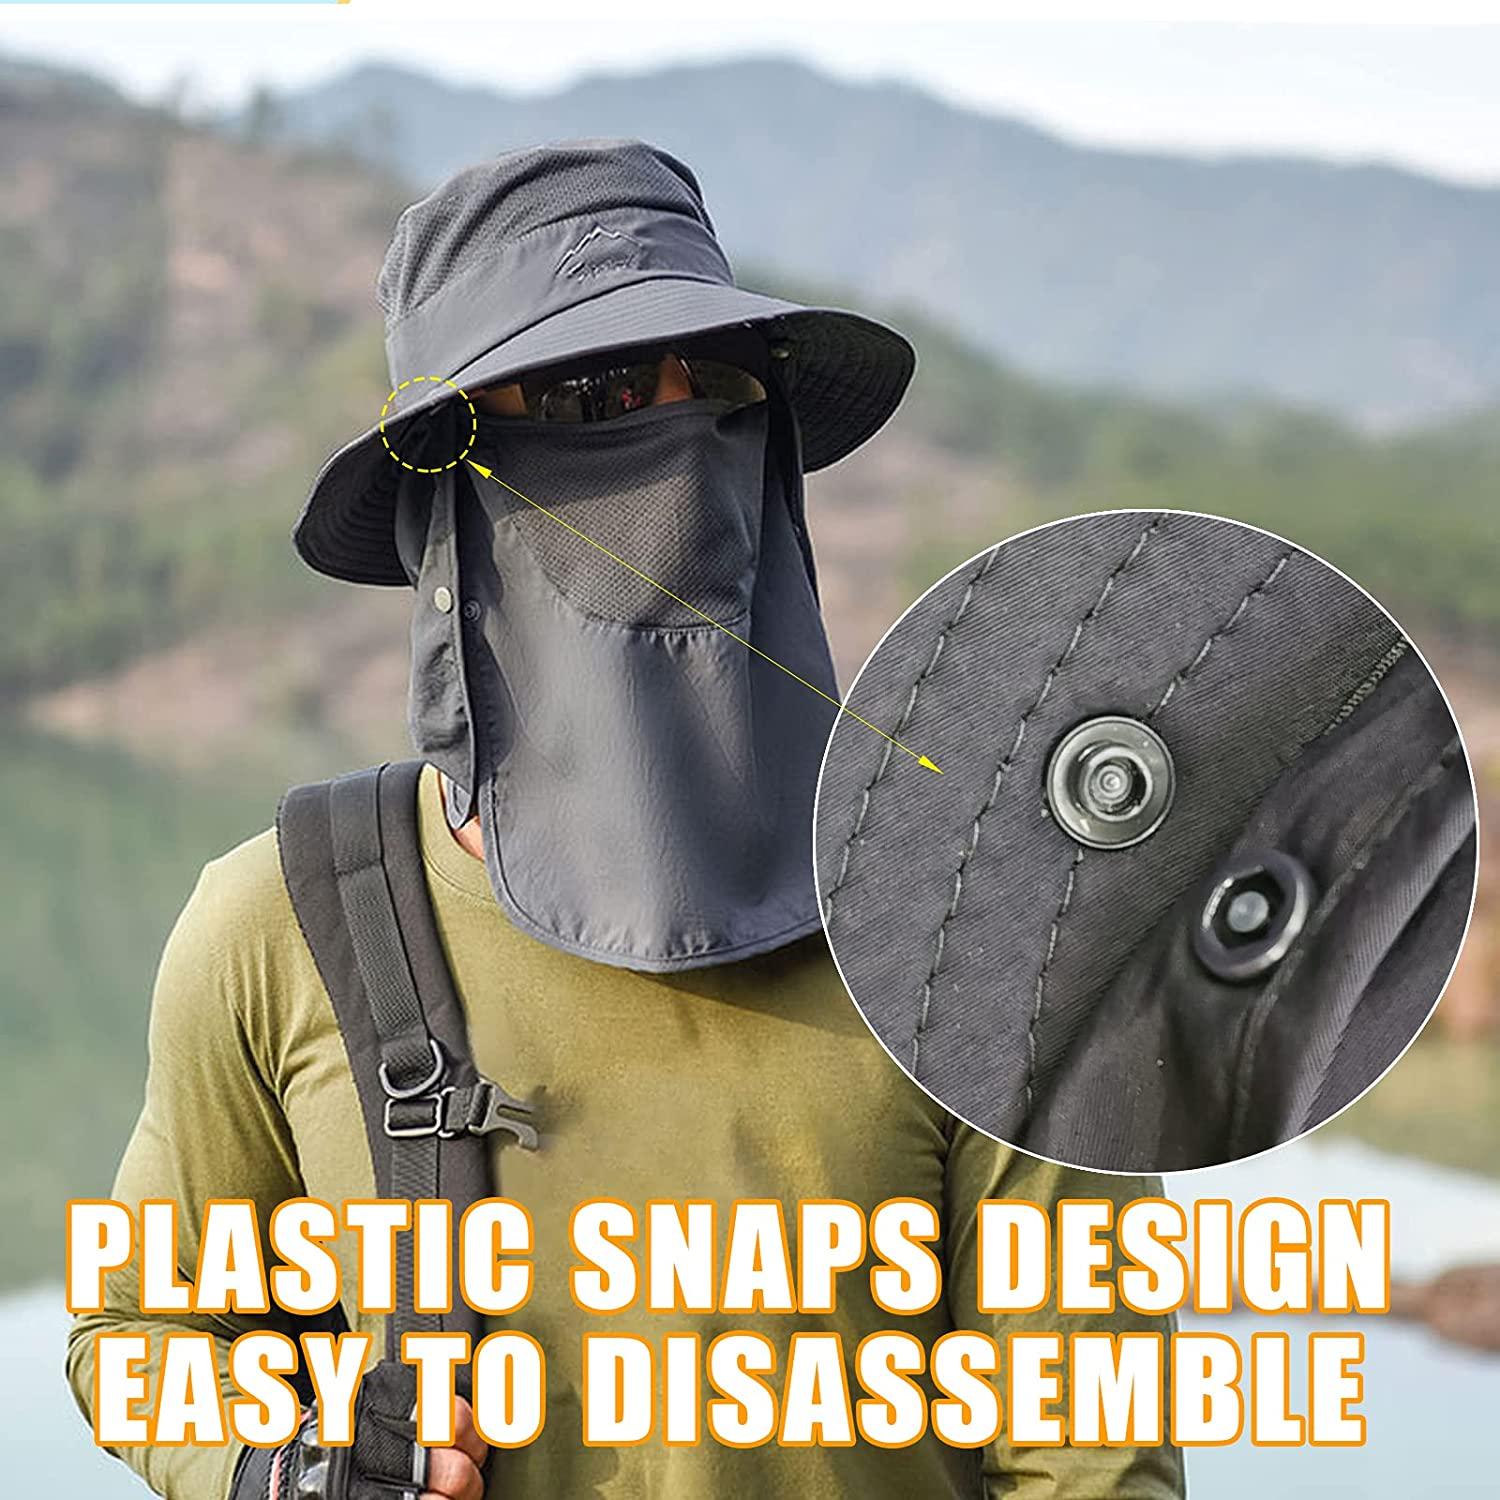 Buy Foldable Sun Cap, Fishing Hats, UV Protection Caps with Face Mask Neck  Flap Dark Gray at